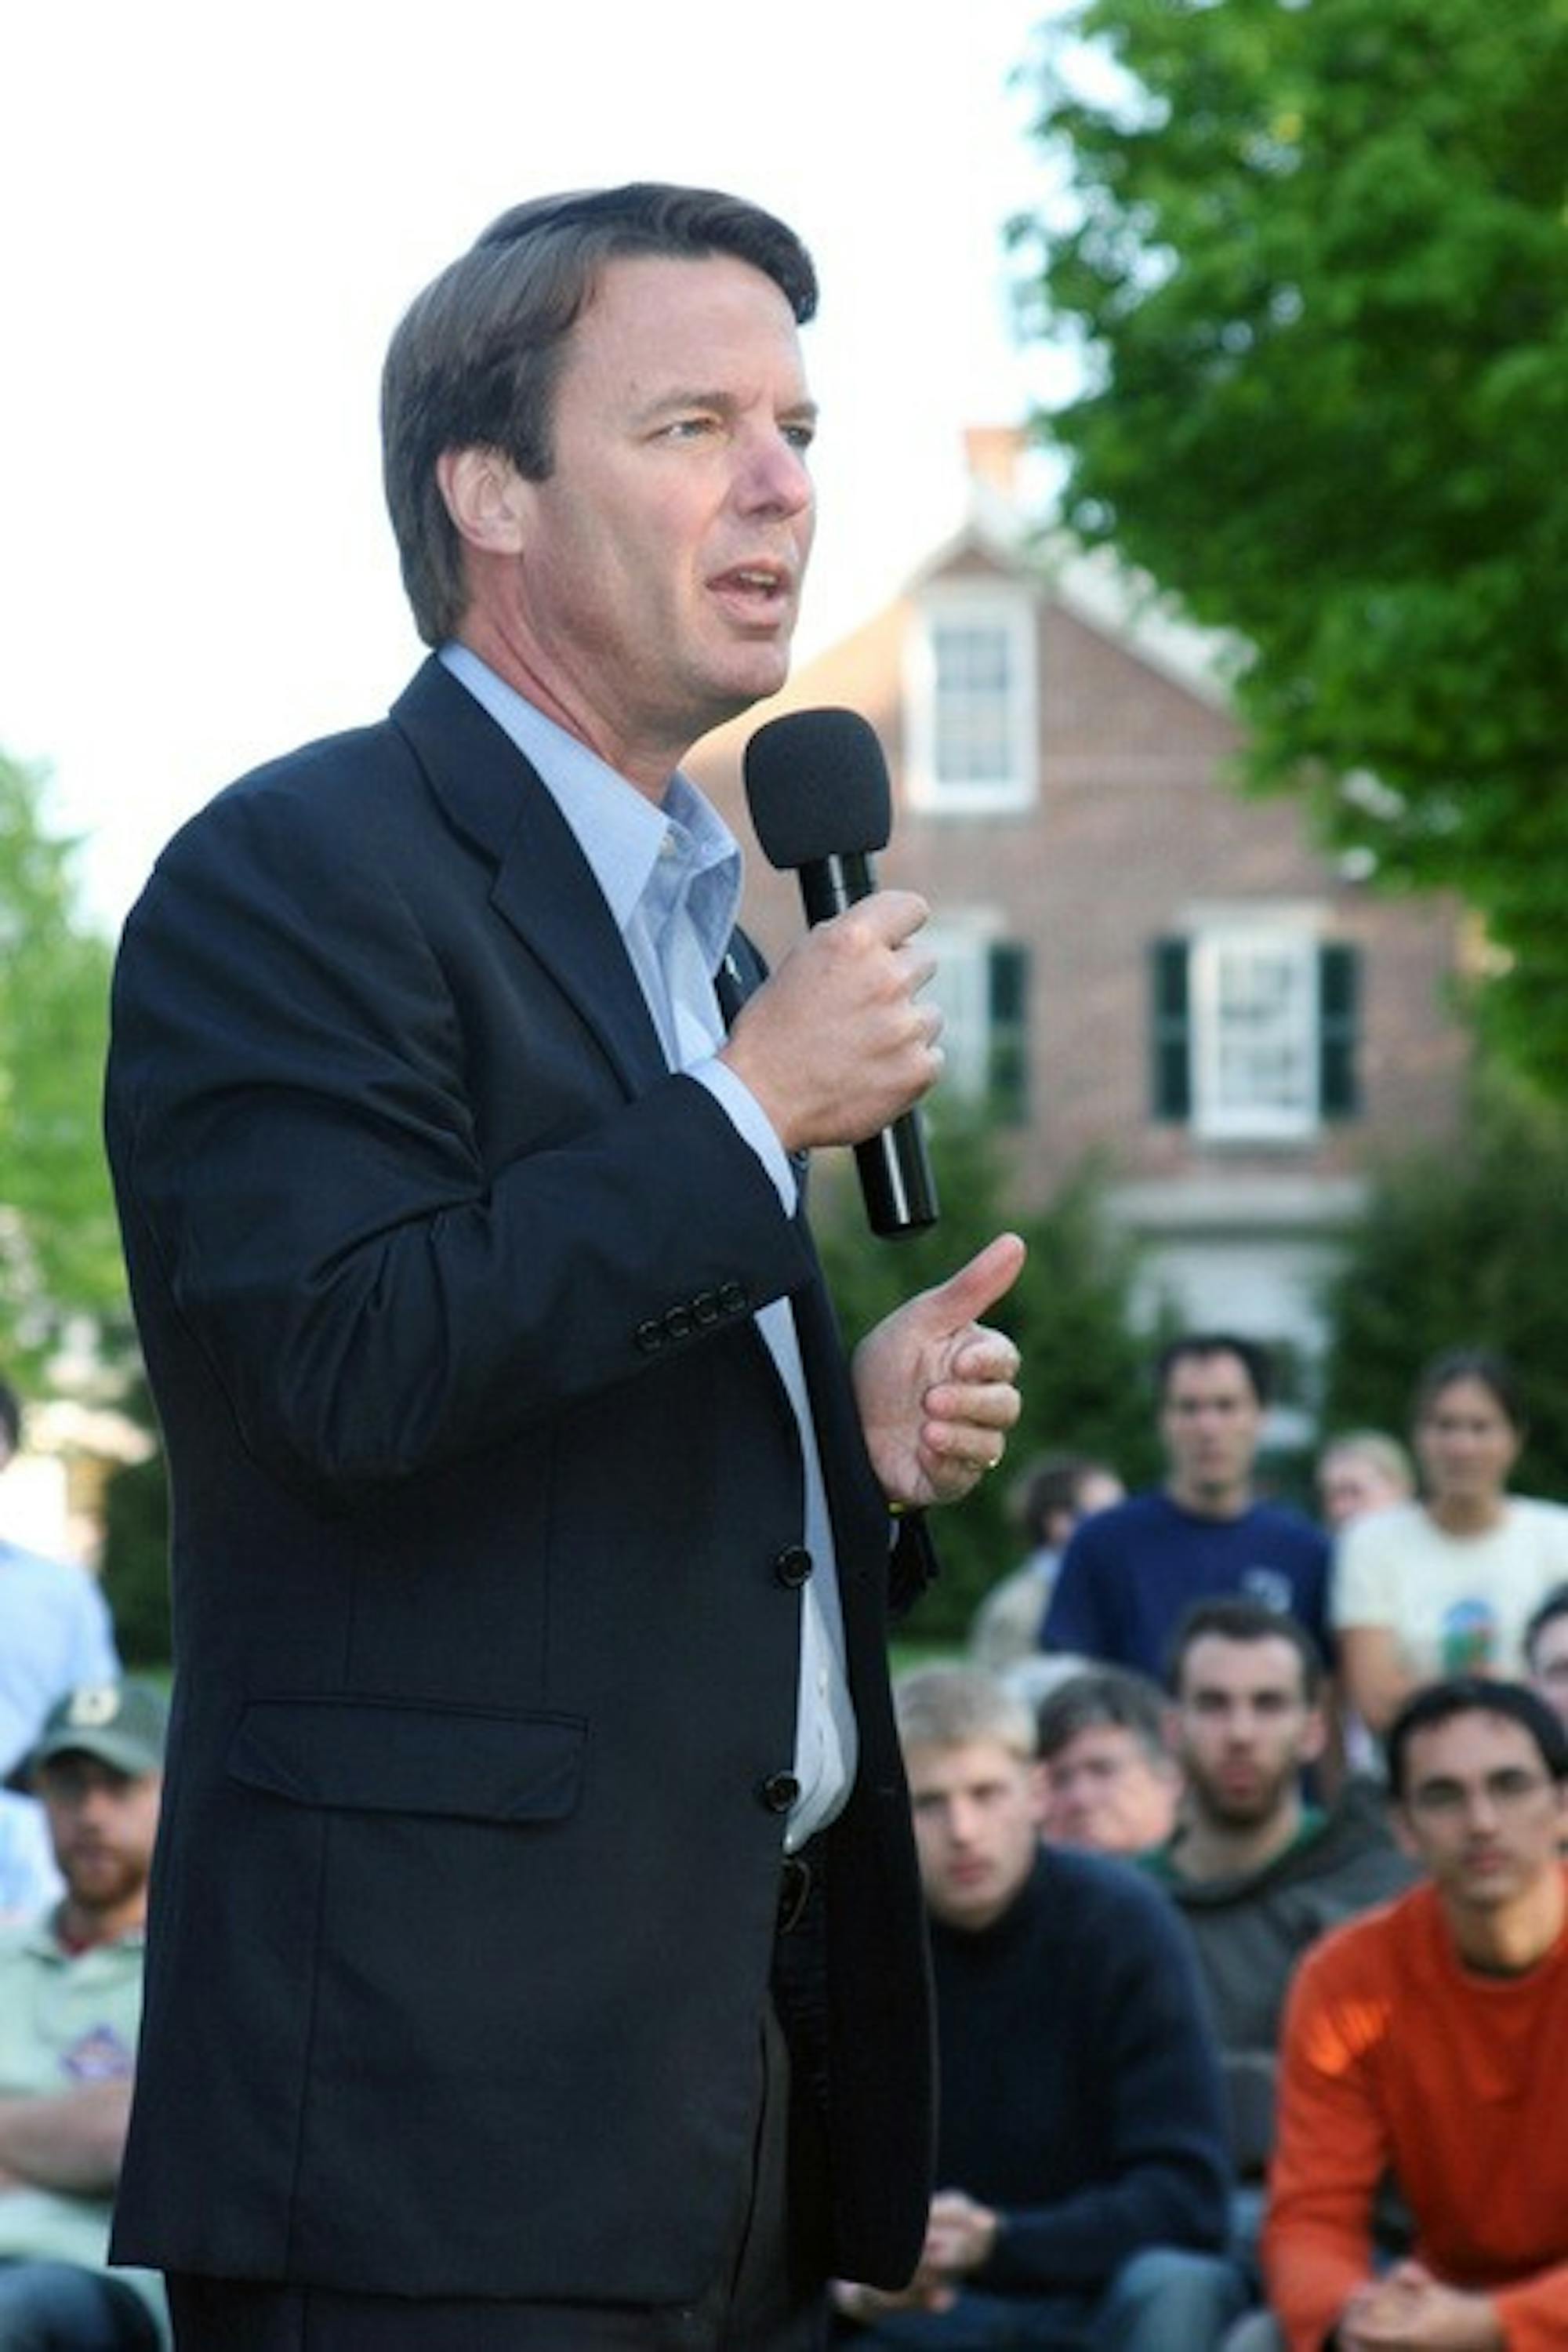 Democratic presidential hopeful John Edwards stumped at a town meeting of about 200 attendees Monday night at Lebanon's Coburn Park.